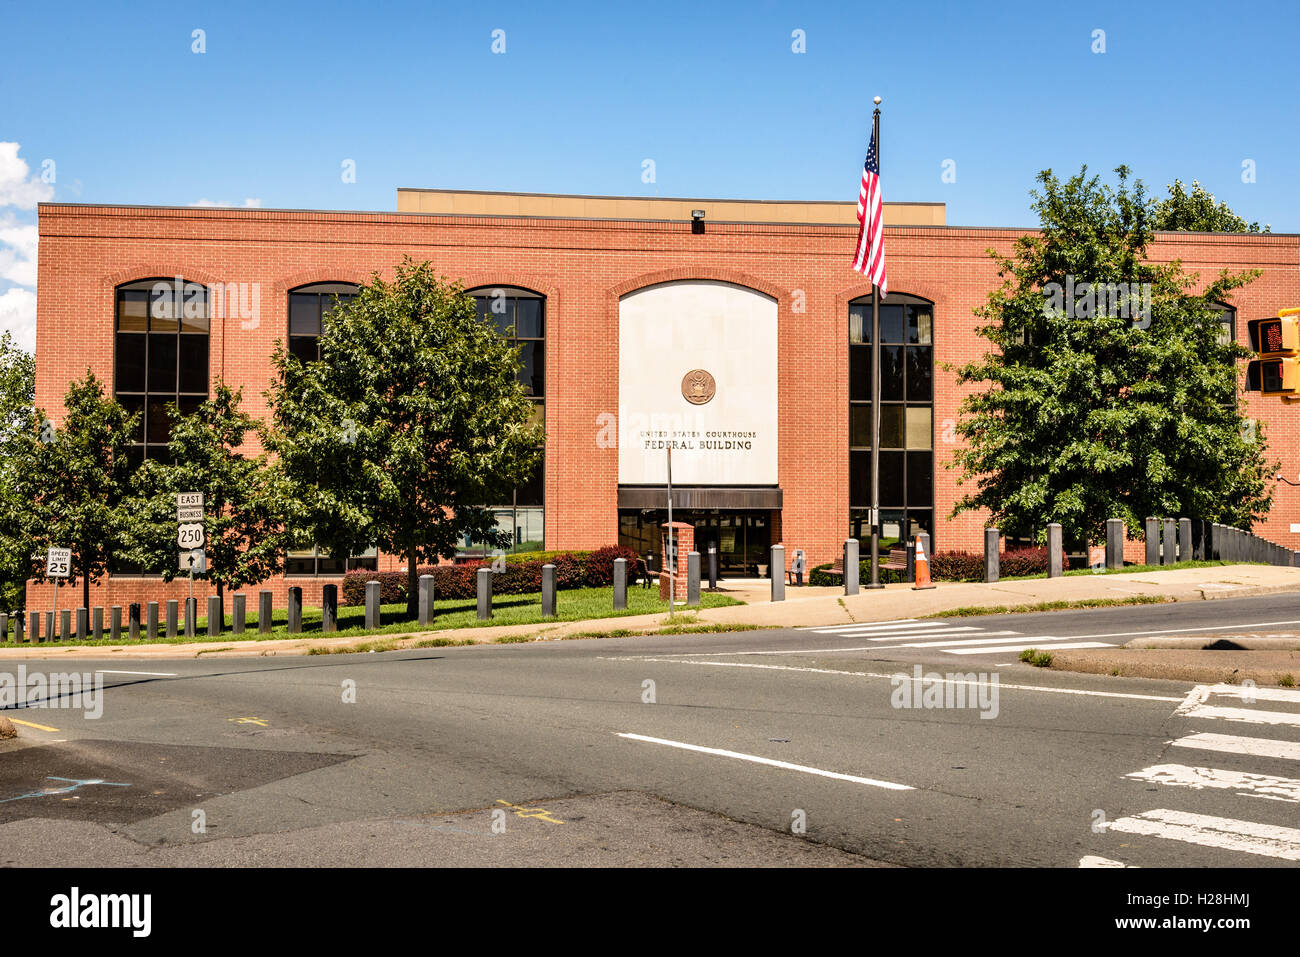 Western District of Virginia, United States District Court, 255 West Main Street, Charlottesville, Virginia Stock Photo